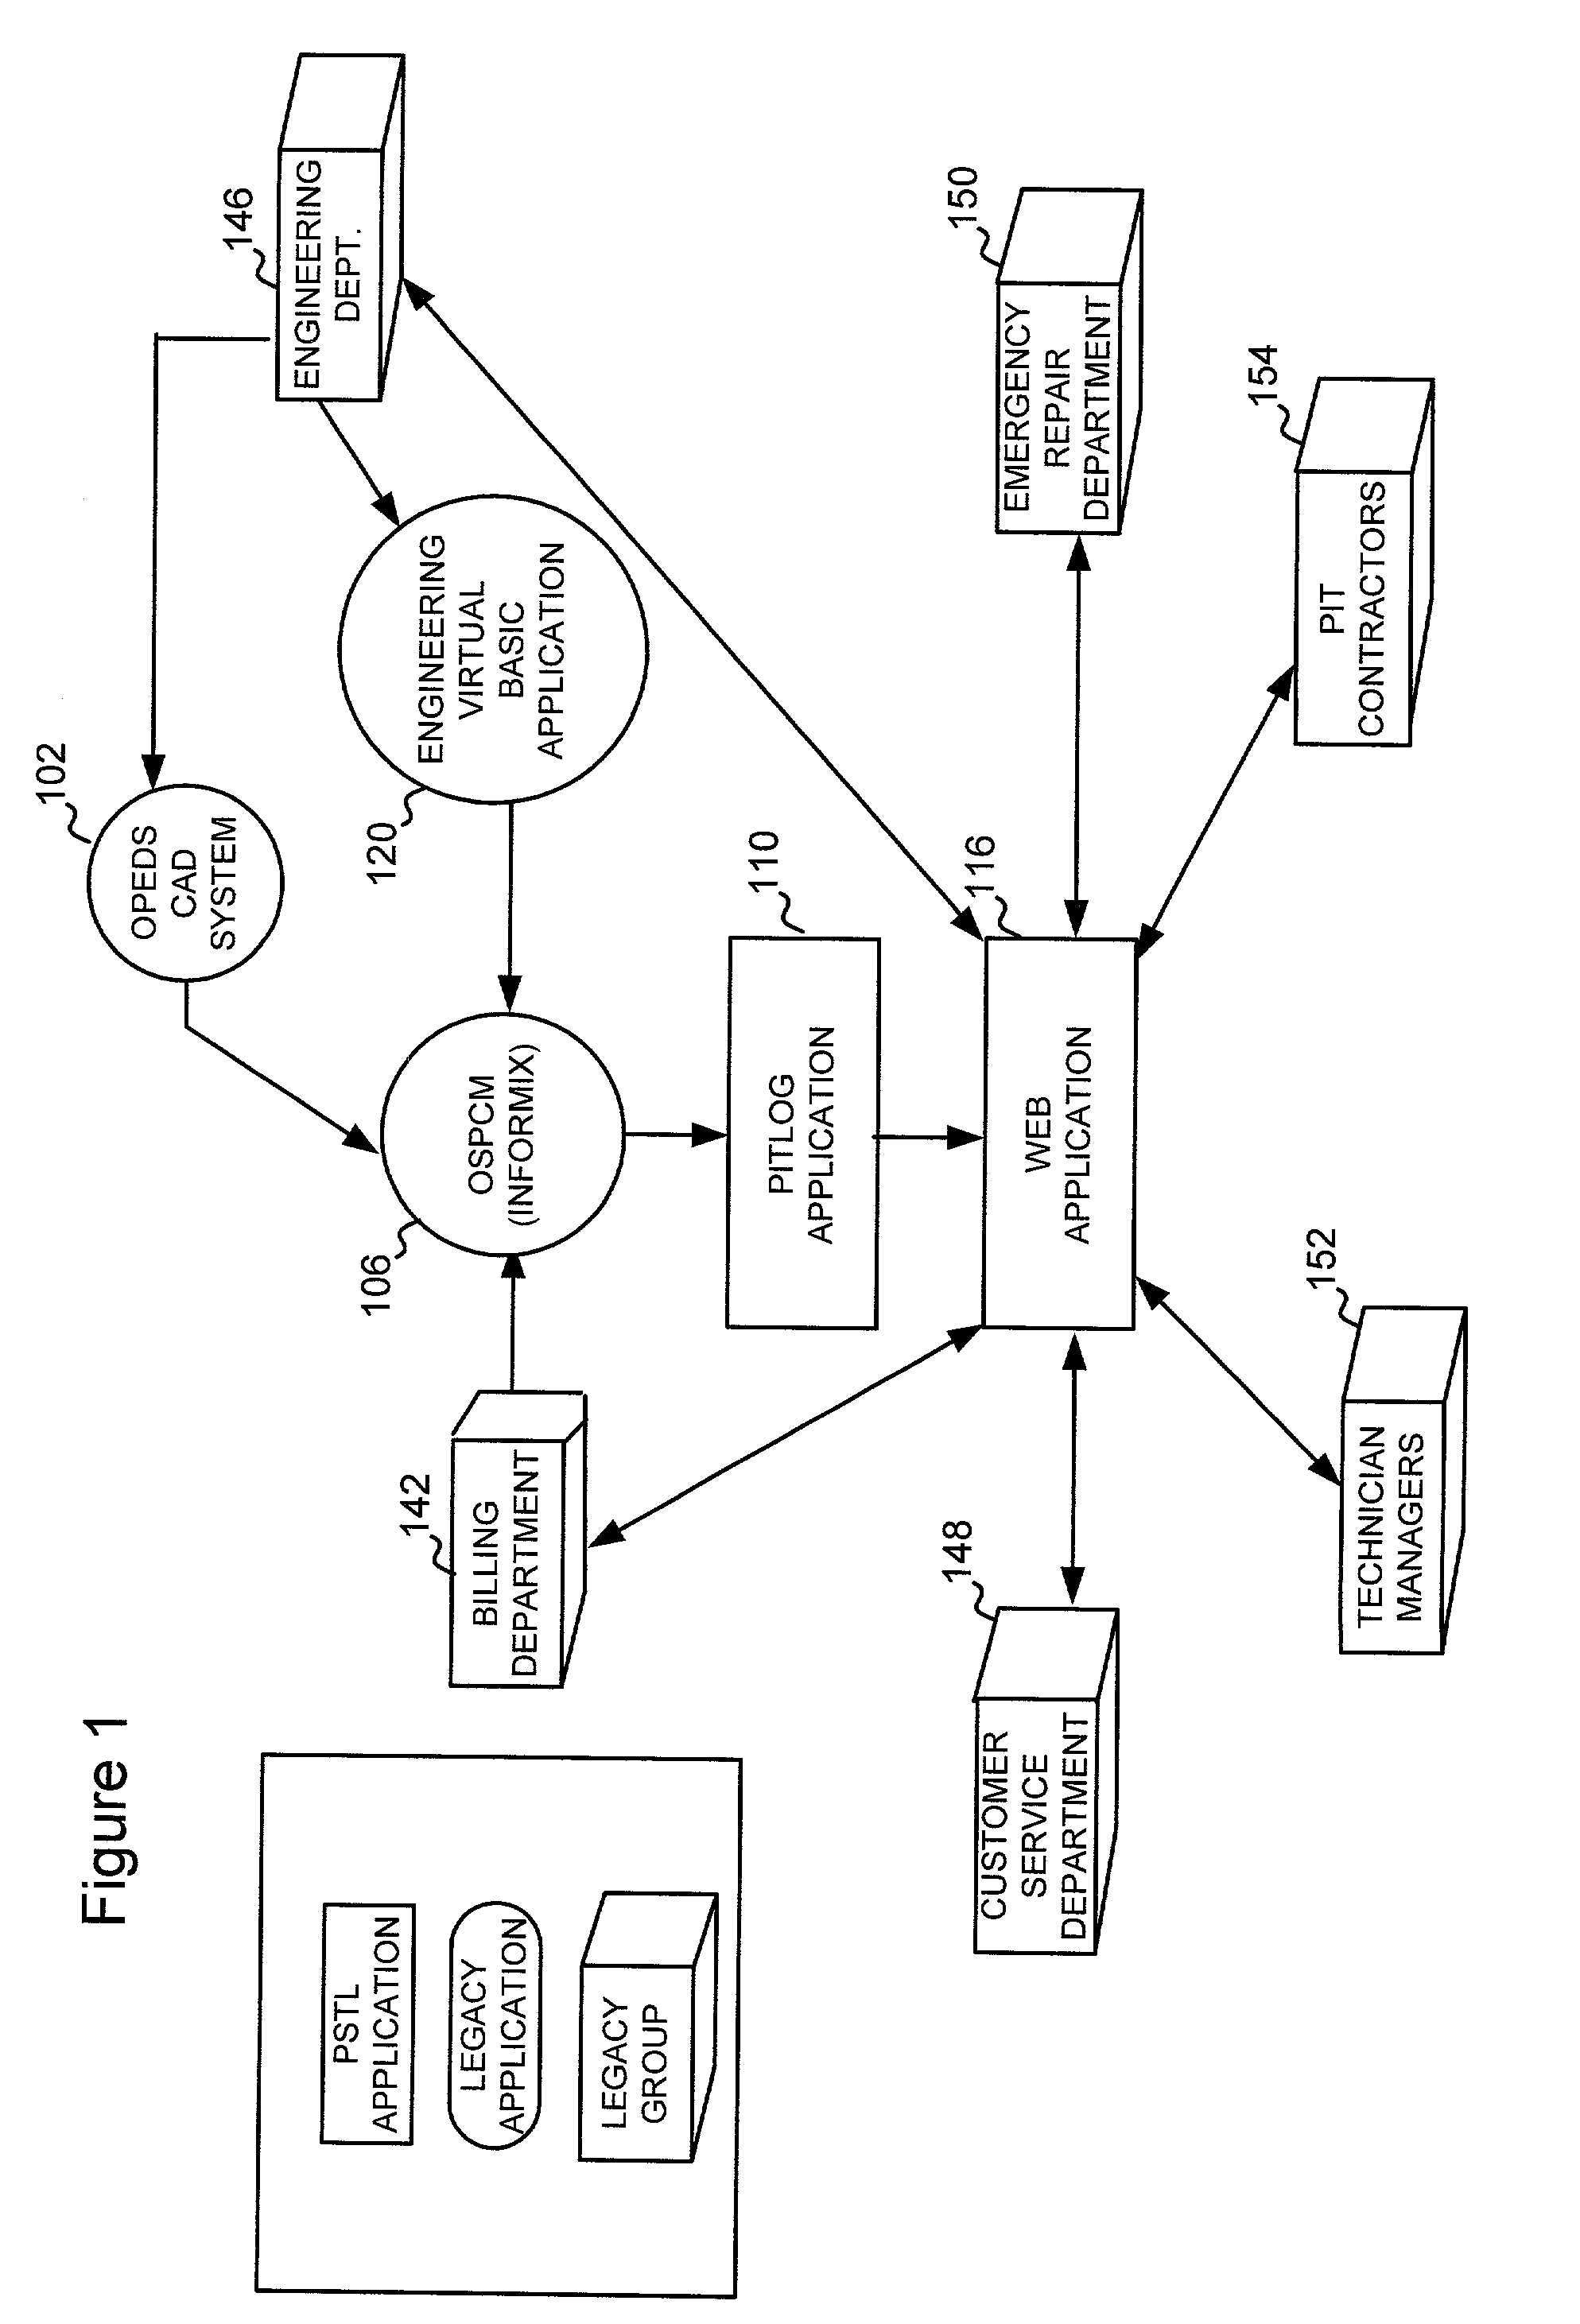 System and method for outside plant construction pit scheduling tool and log